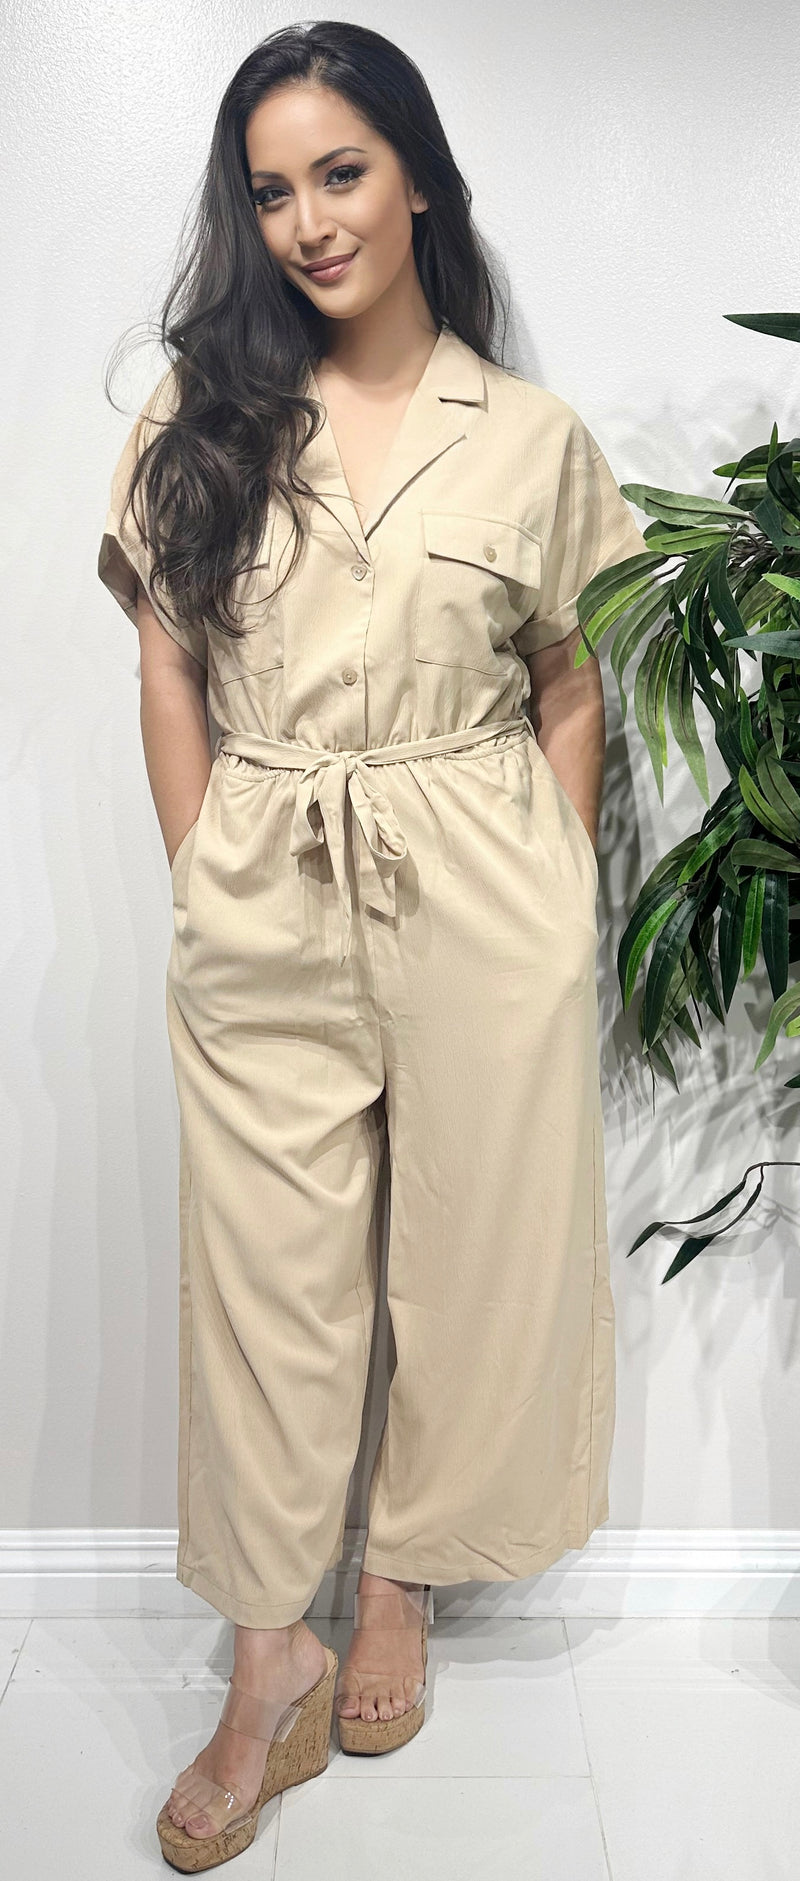 Jeans Warehouse Hawaii - SOLID JUMPERS - TIE WAIST UTILITY JUMPSUIT | By PETAL DEW